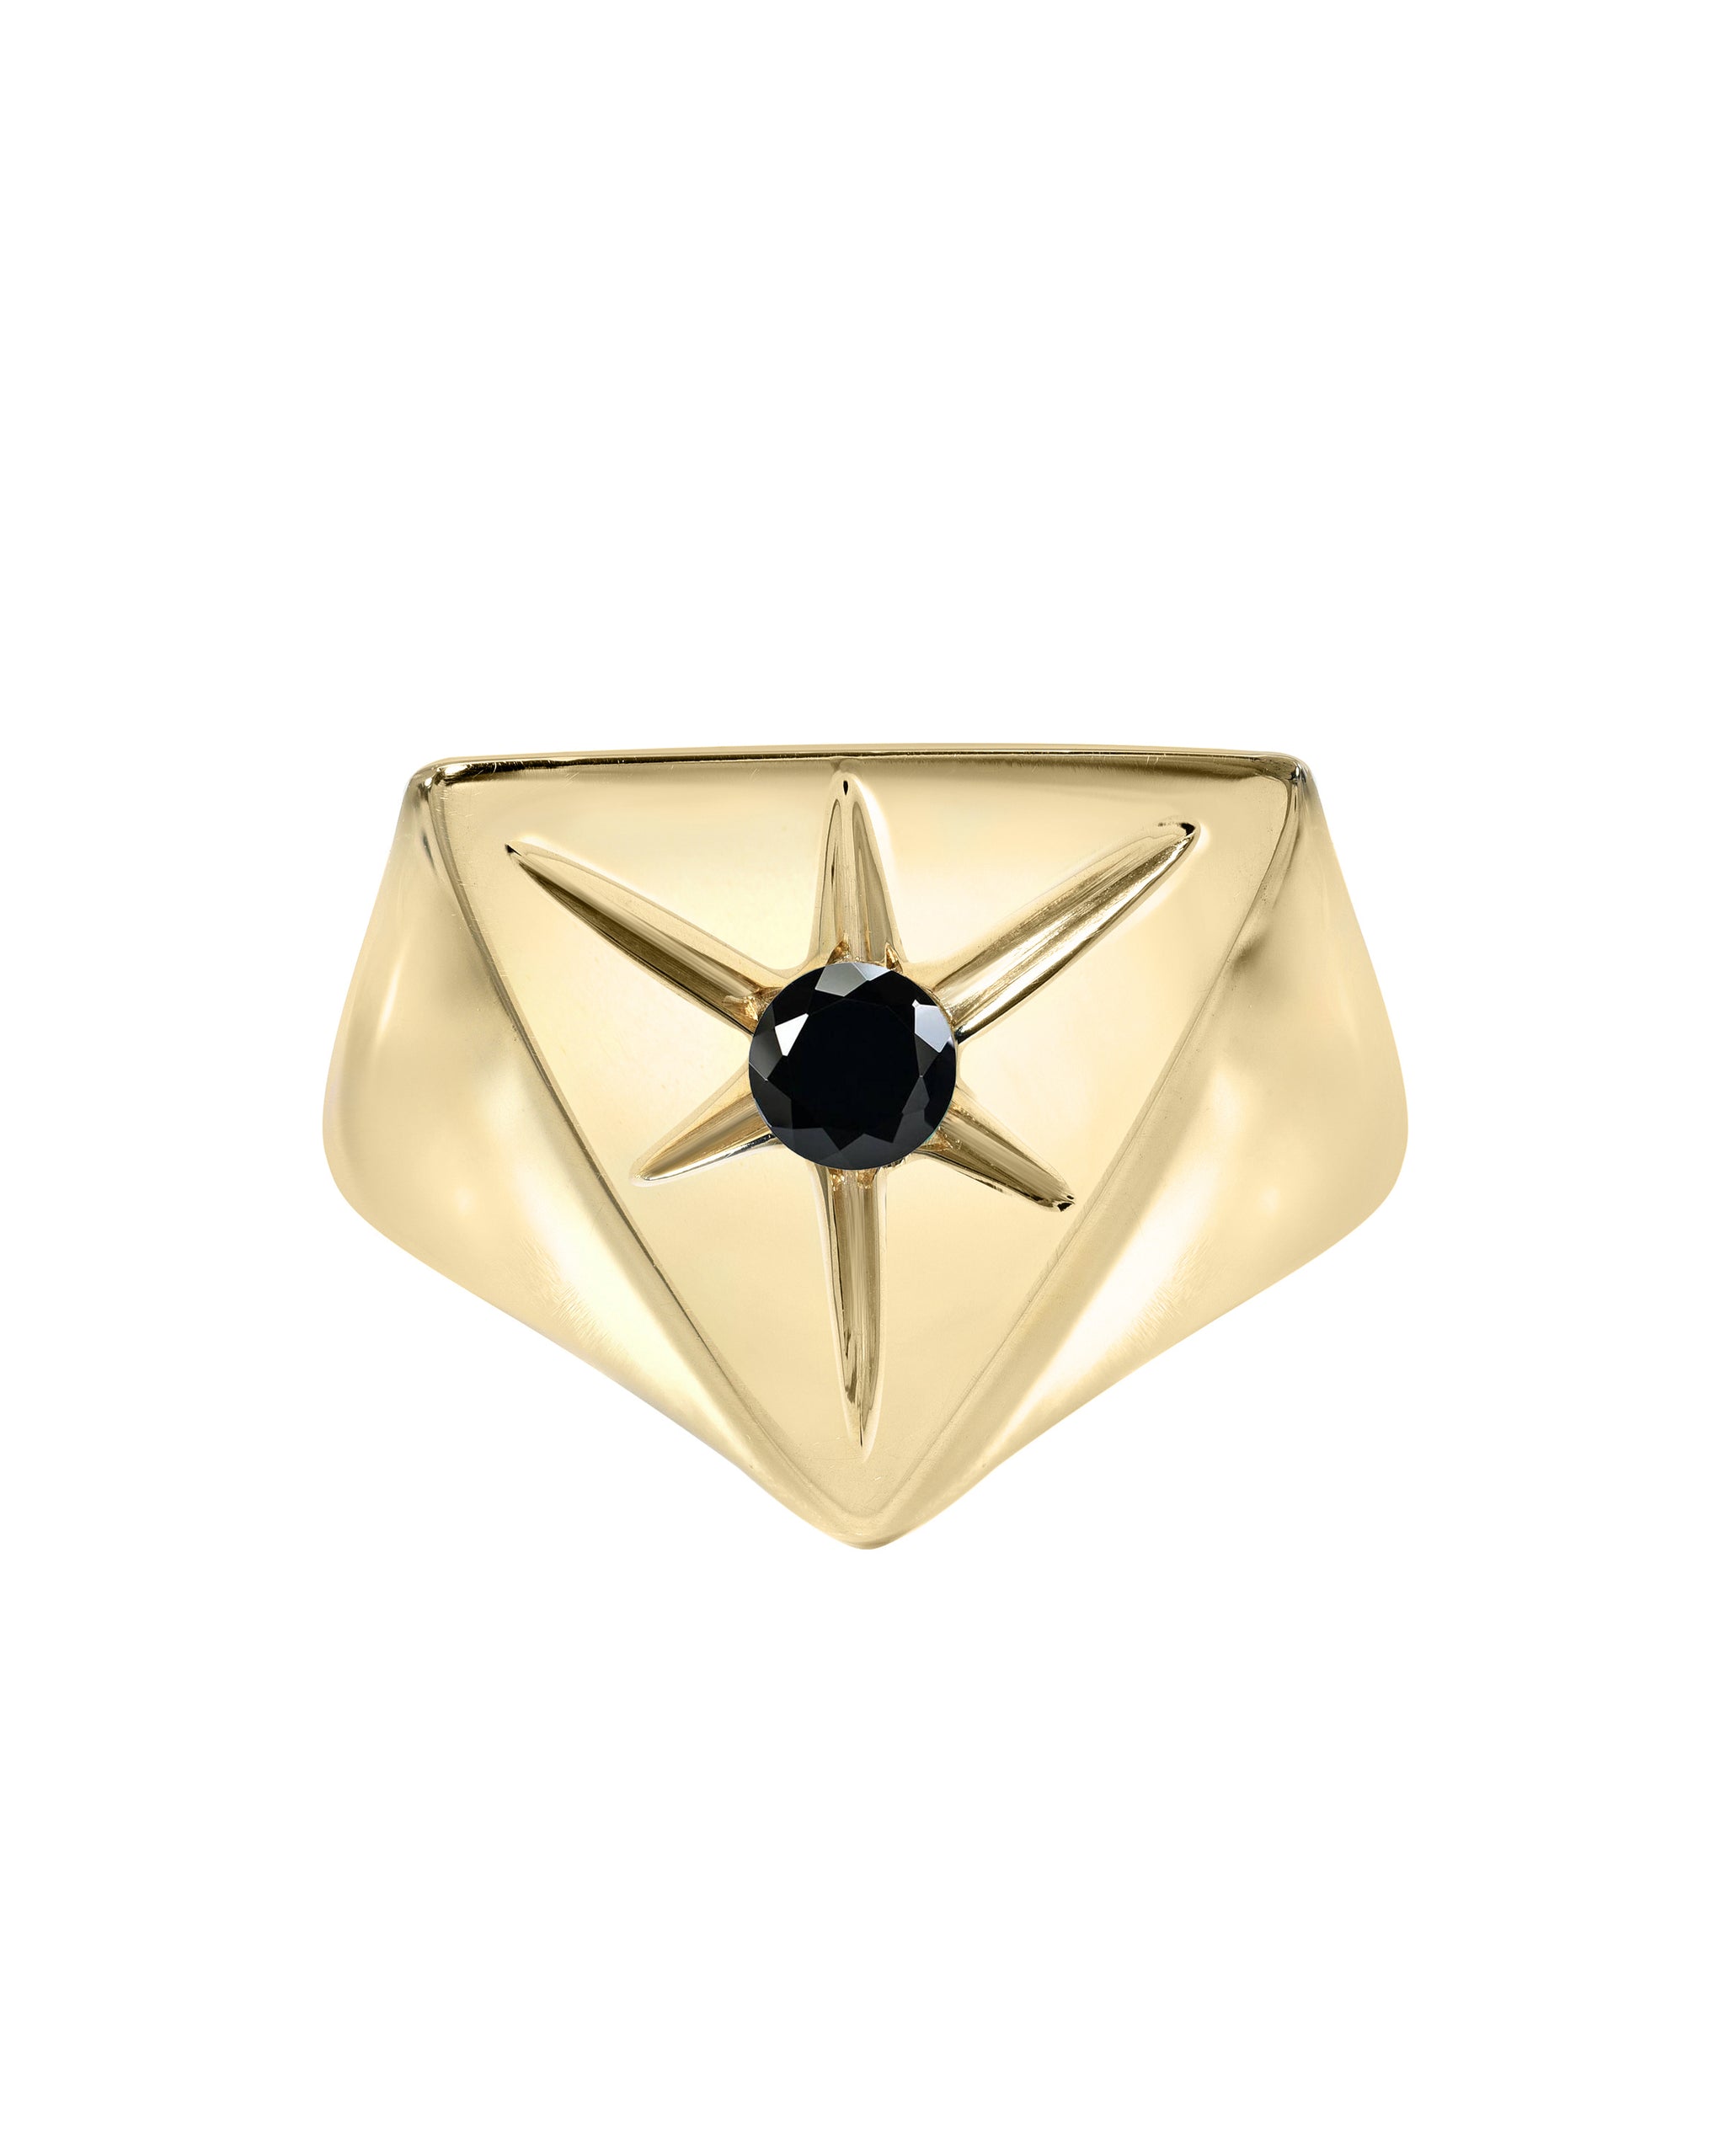 14k gold pyramid signet ring with onyx stone